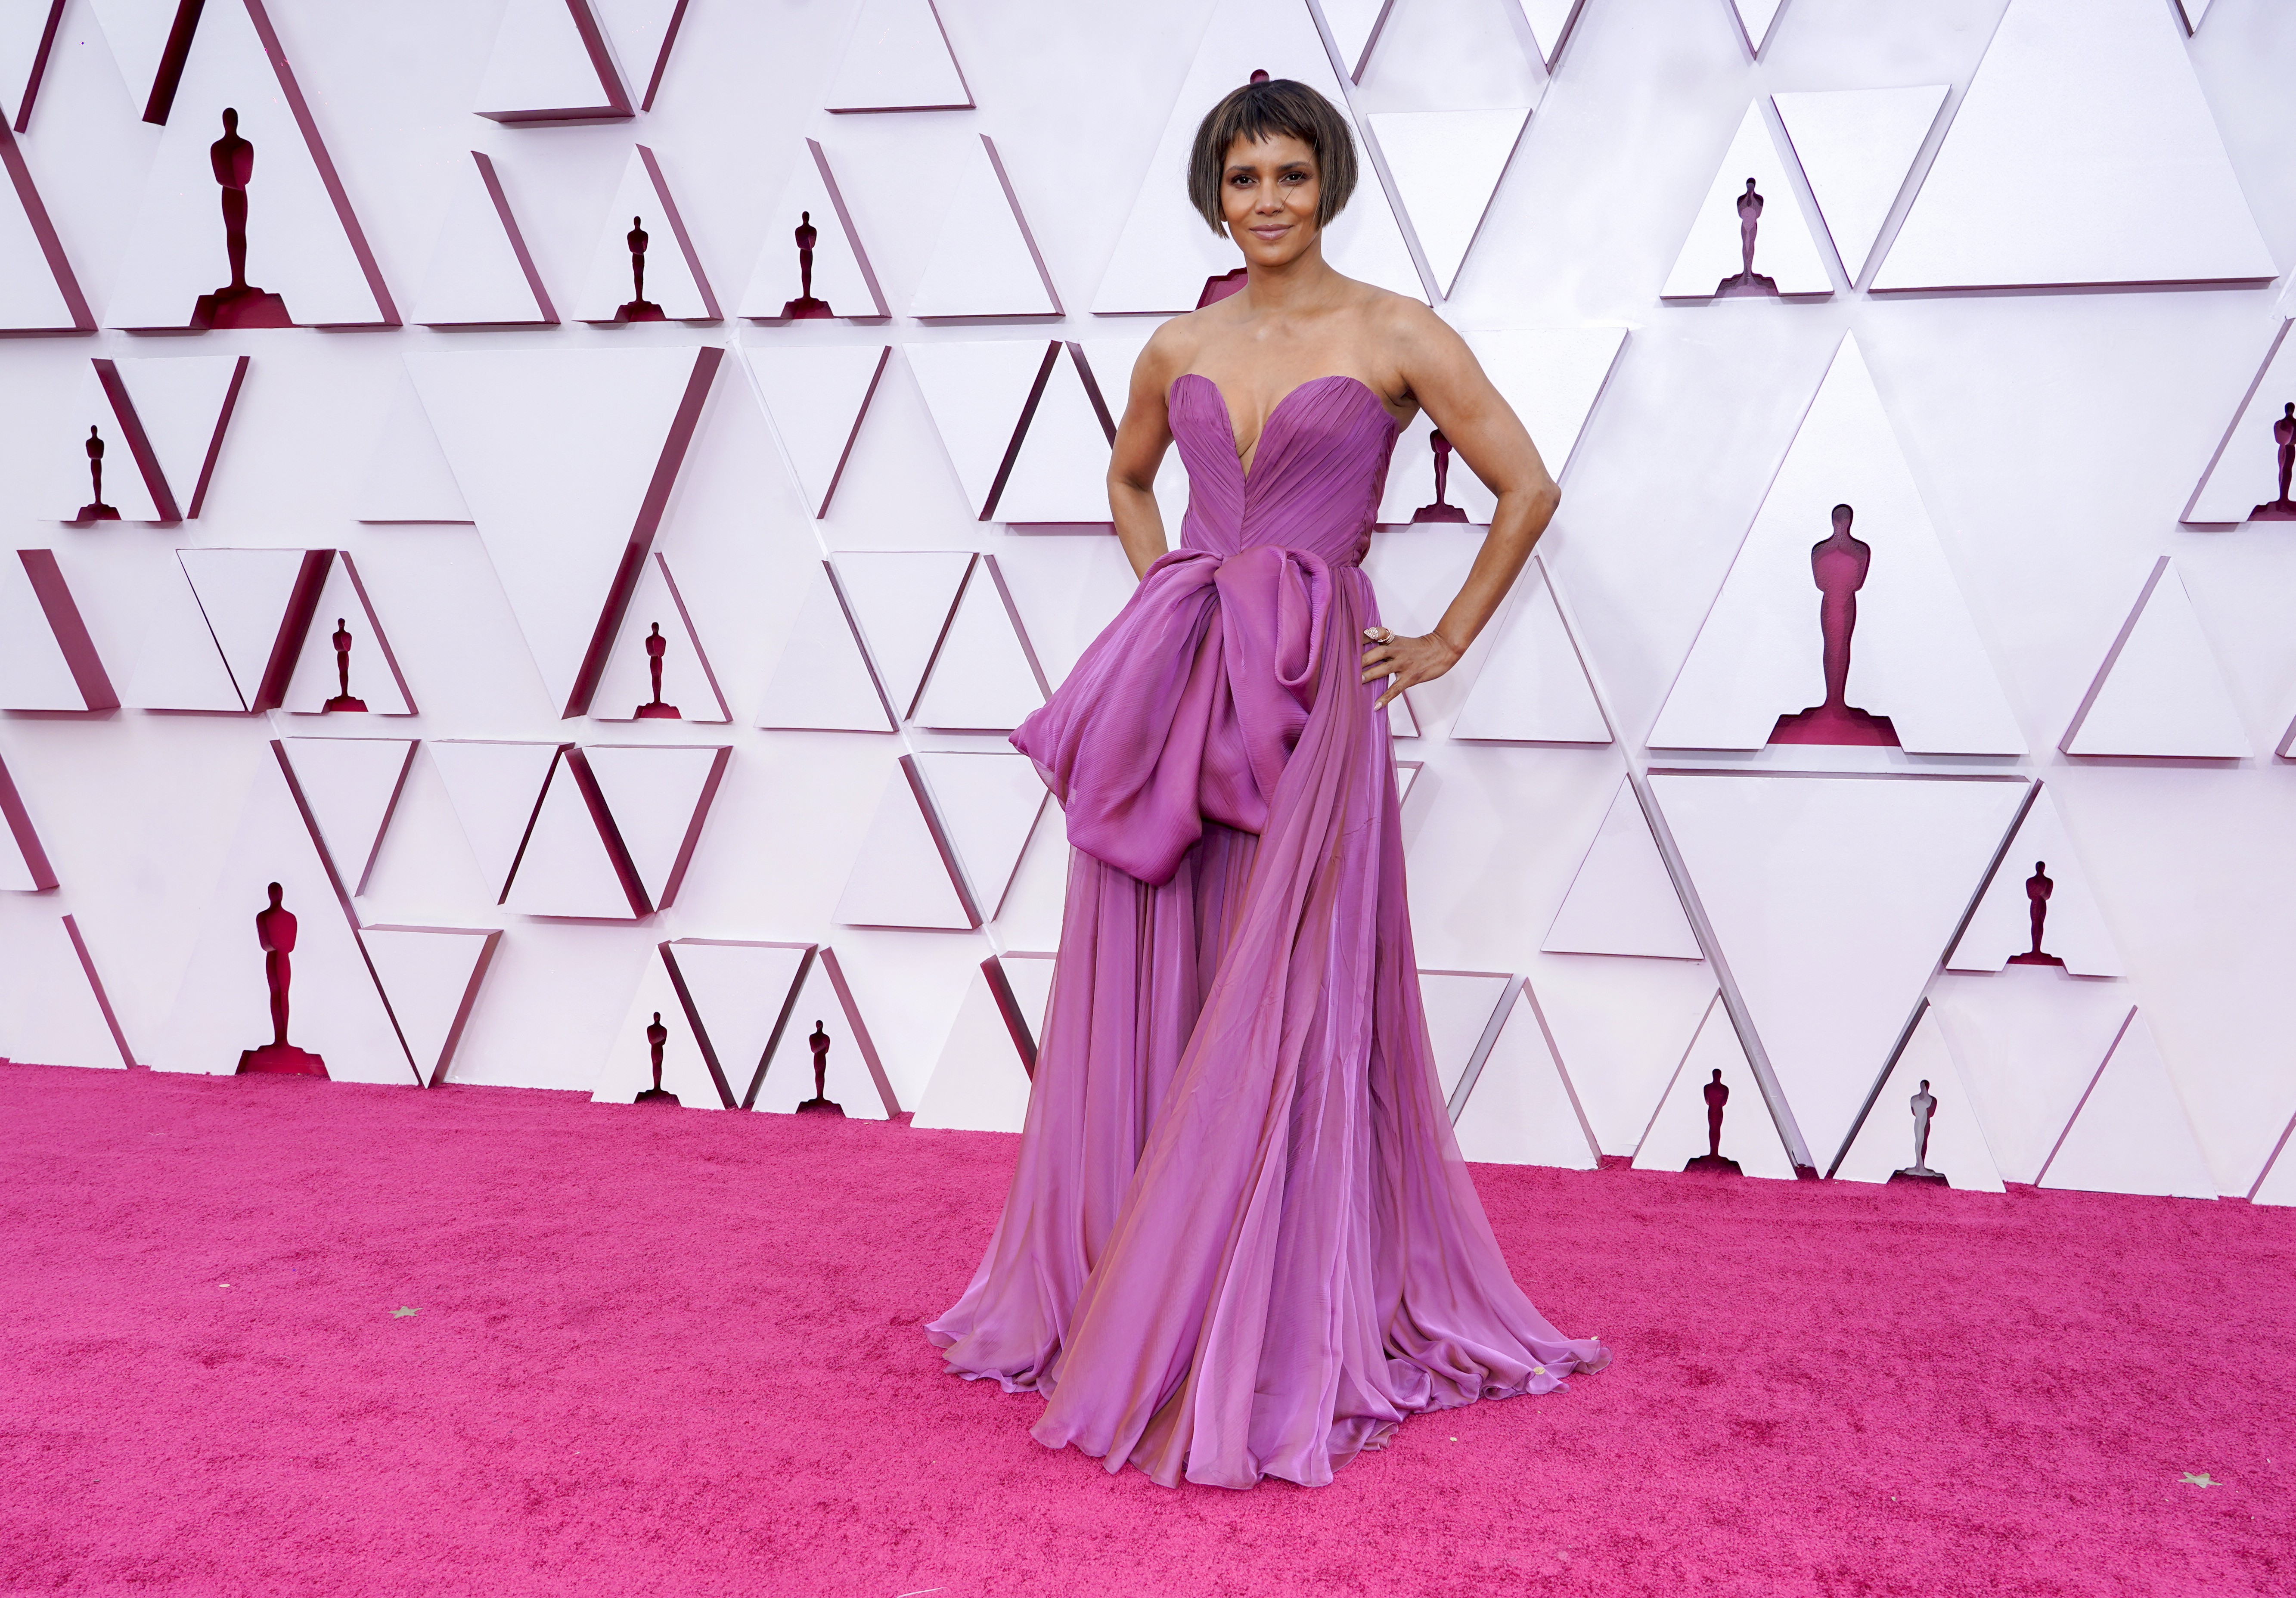 LOS ANGELES, CALIFORNIA – APRIL 25: Halle Berry attends the 93rd Annual Academy Awards at Union Station on April 25, 2021 in Los Angeles, California. (Photo by Chris Pizzello-Pool/Getty Images) (Foto: Getty Images)